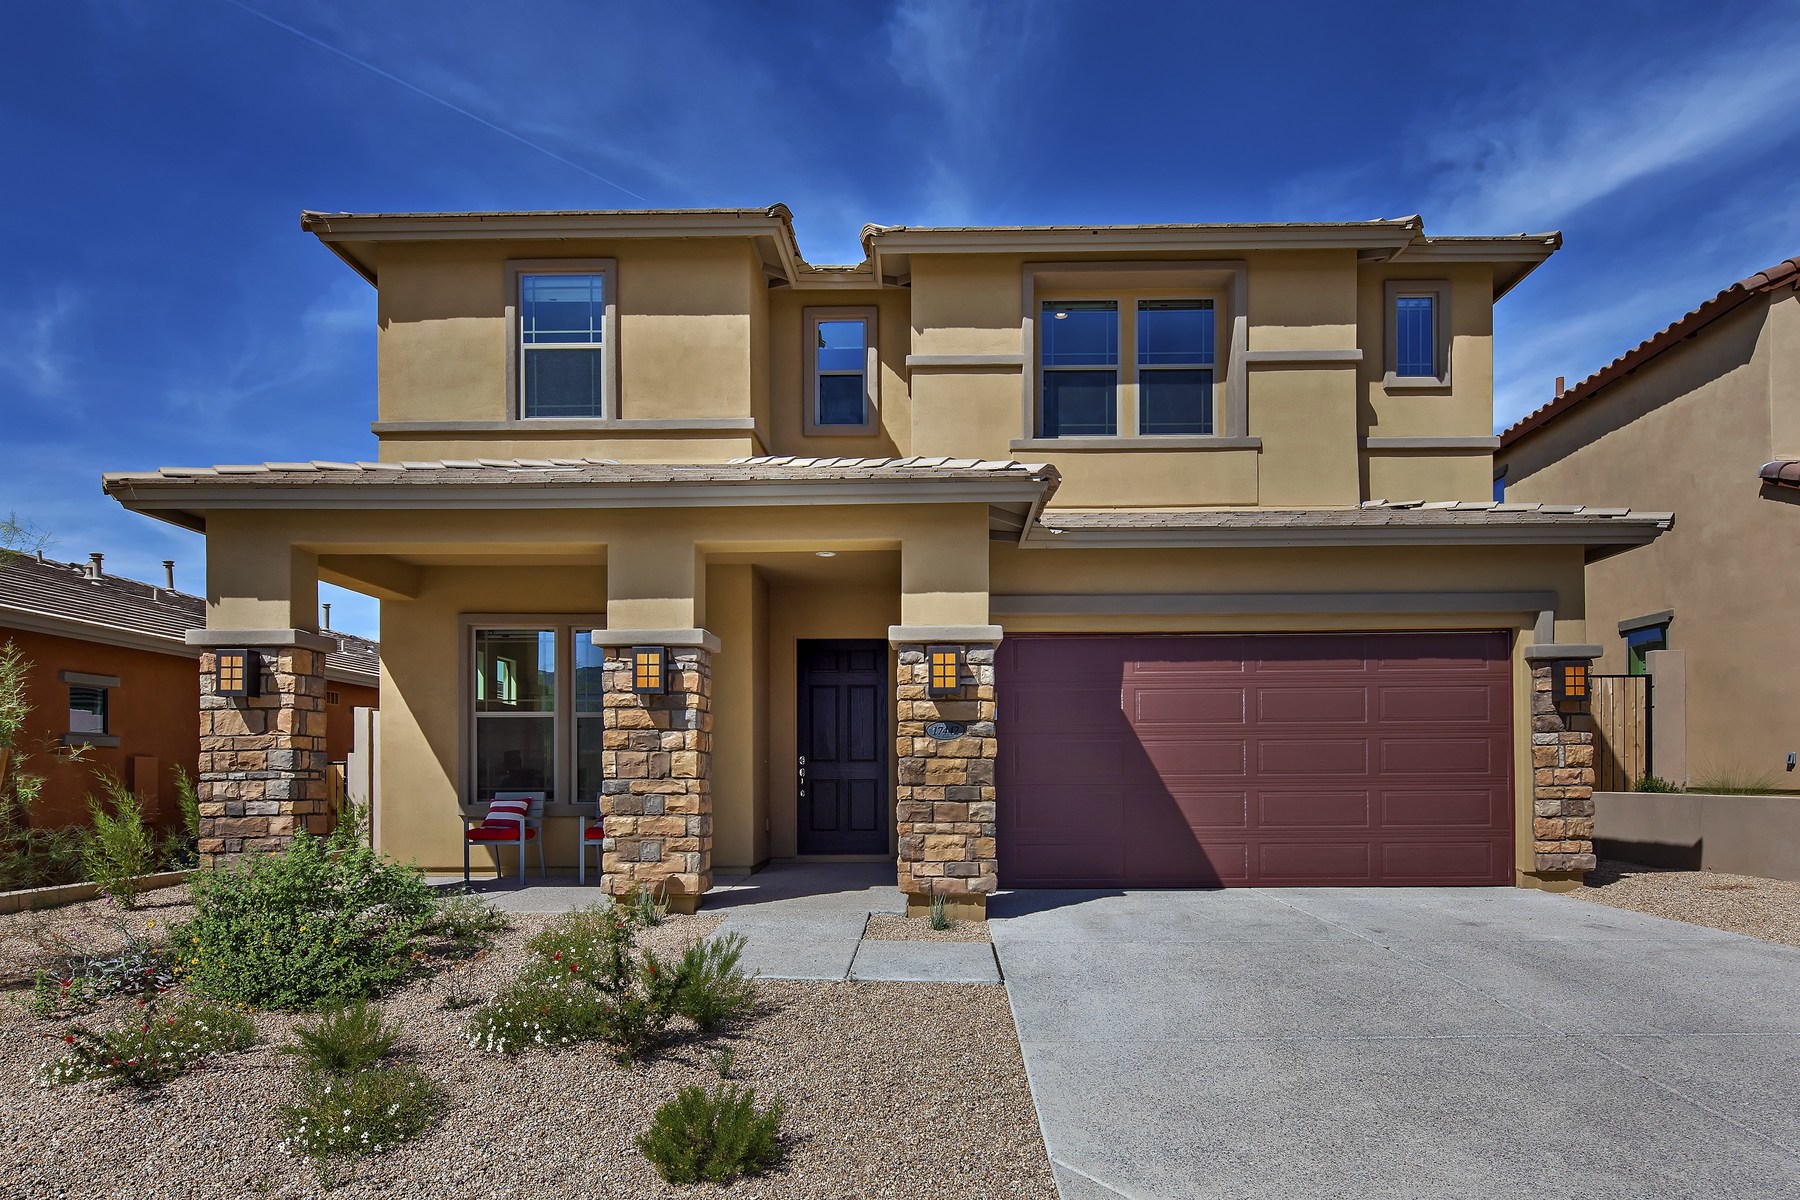 Rent continues to rise for Arizona golf homes